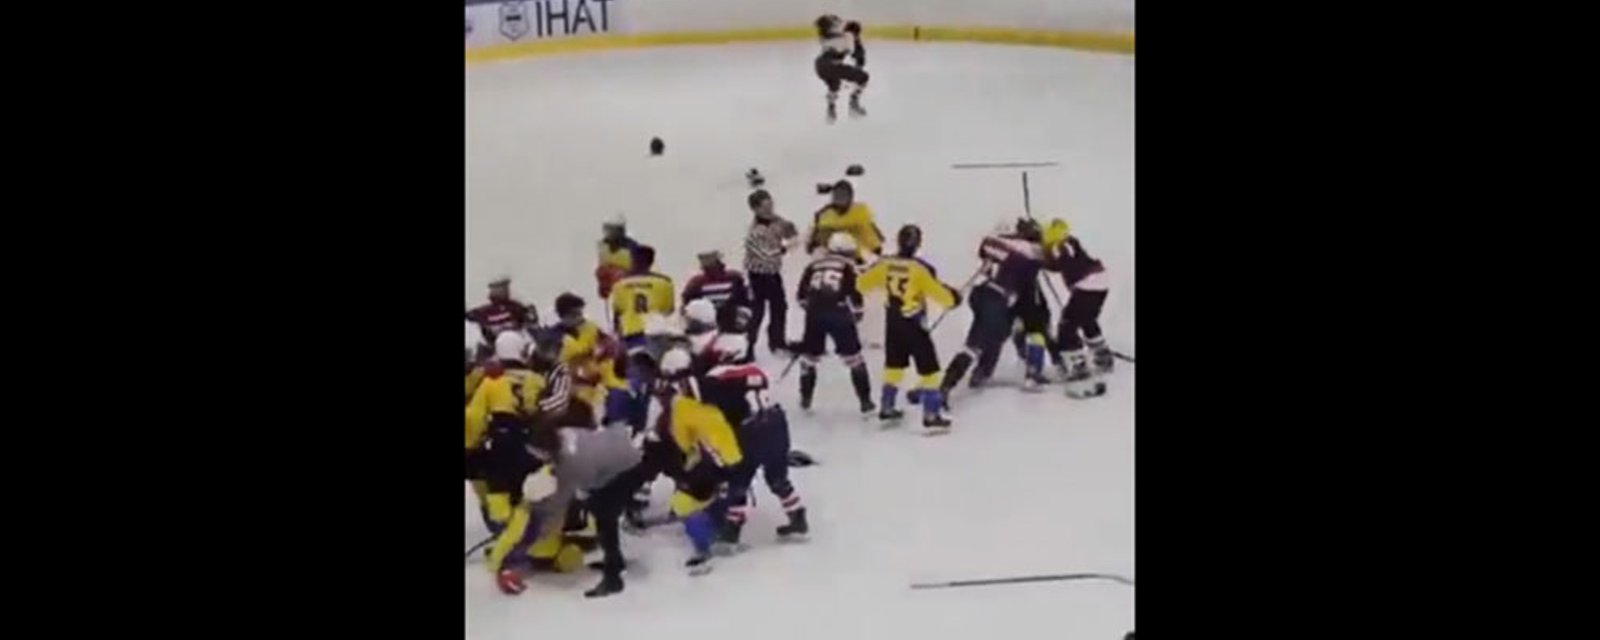 Teenager goes viral after fighting himself in bench clearing brawl